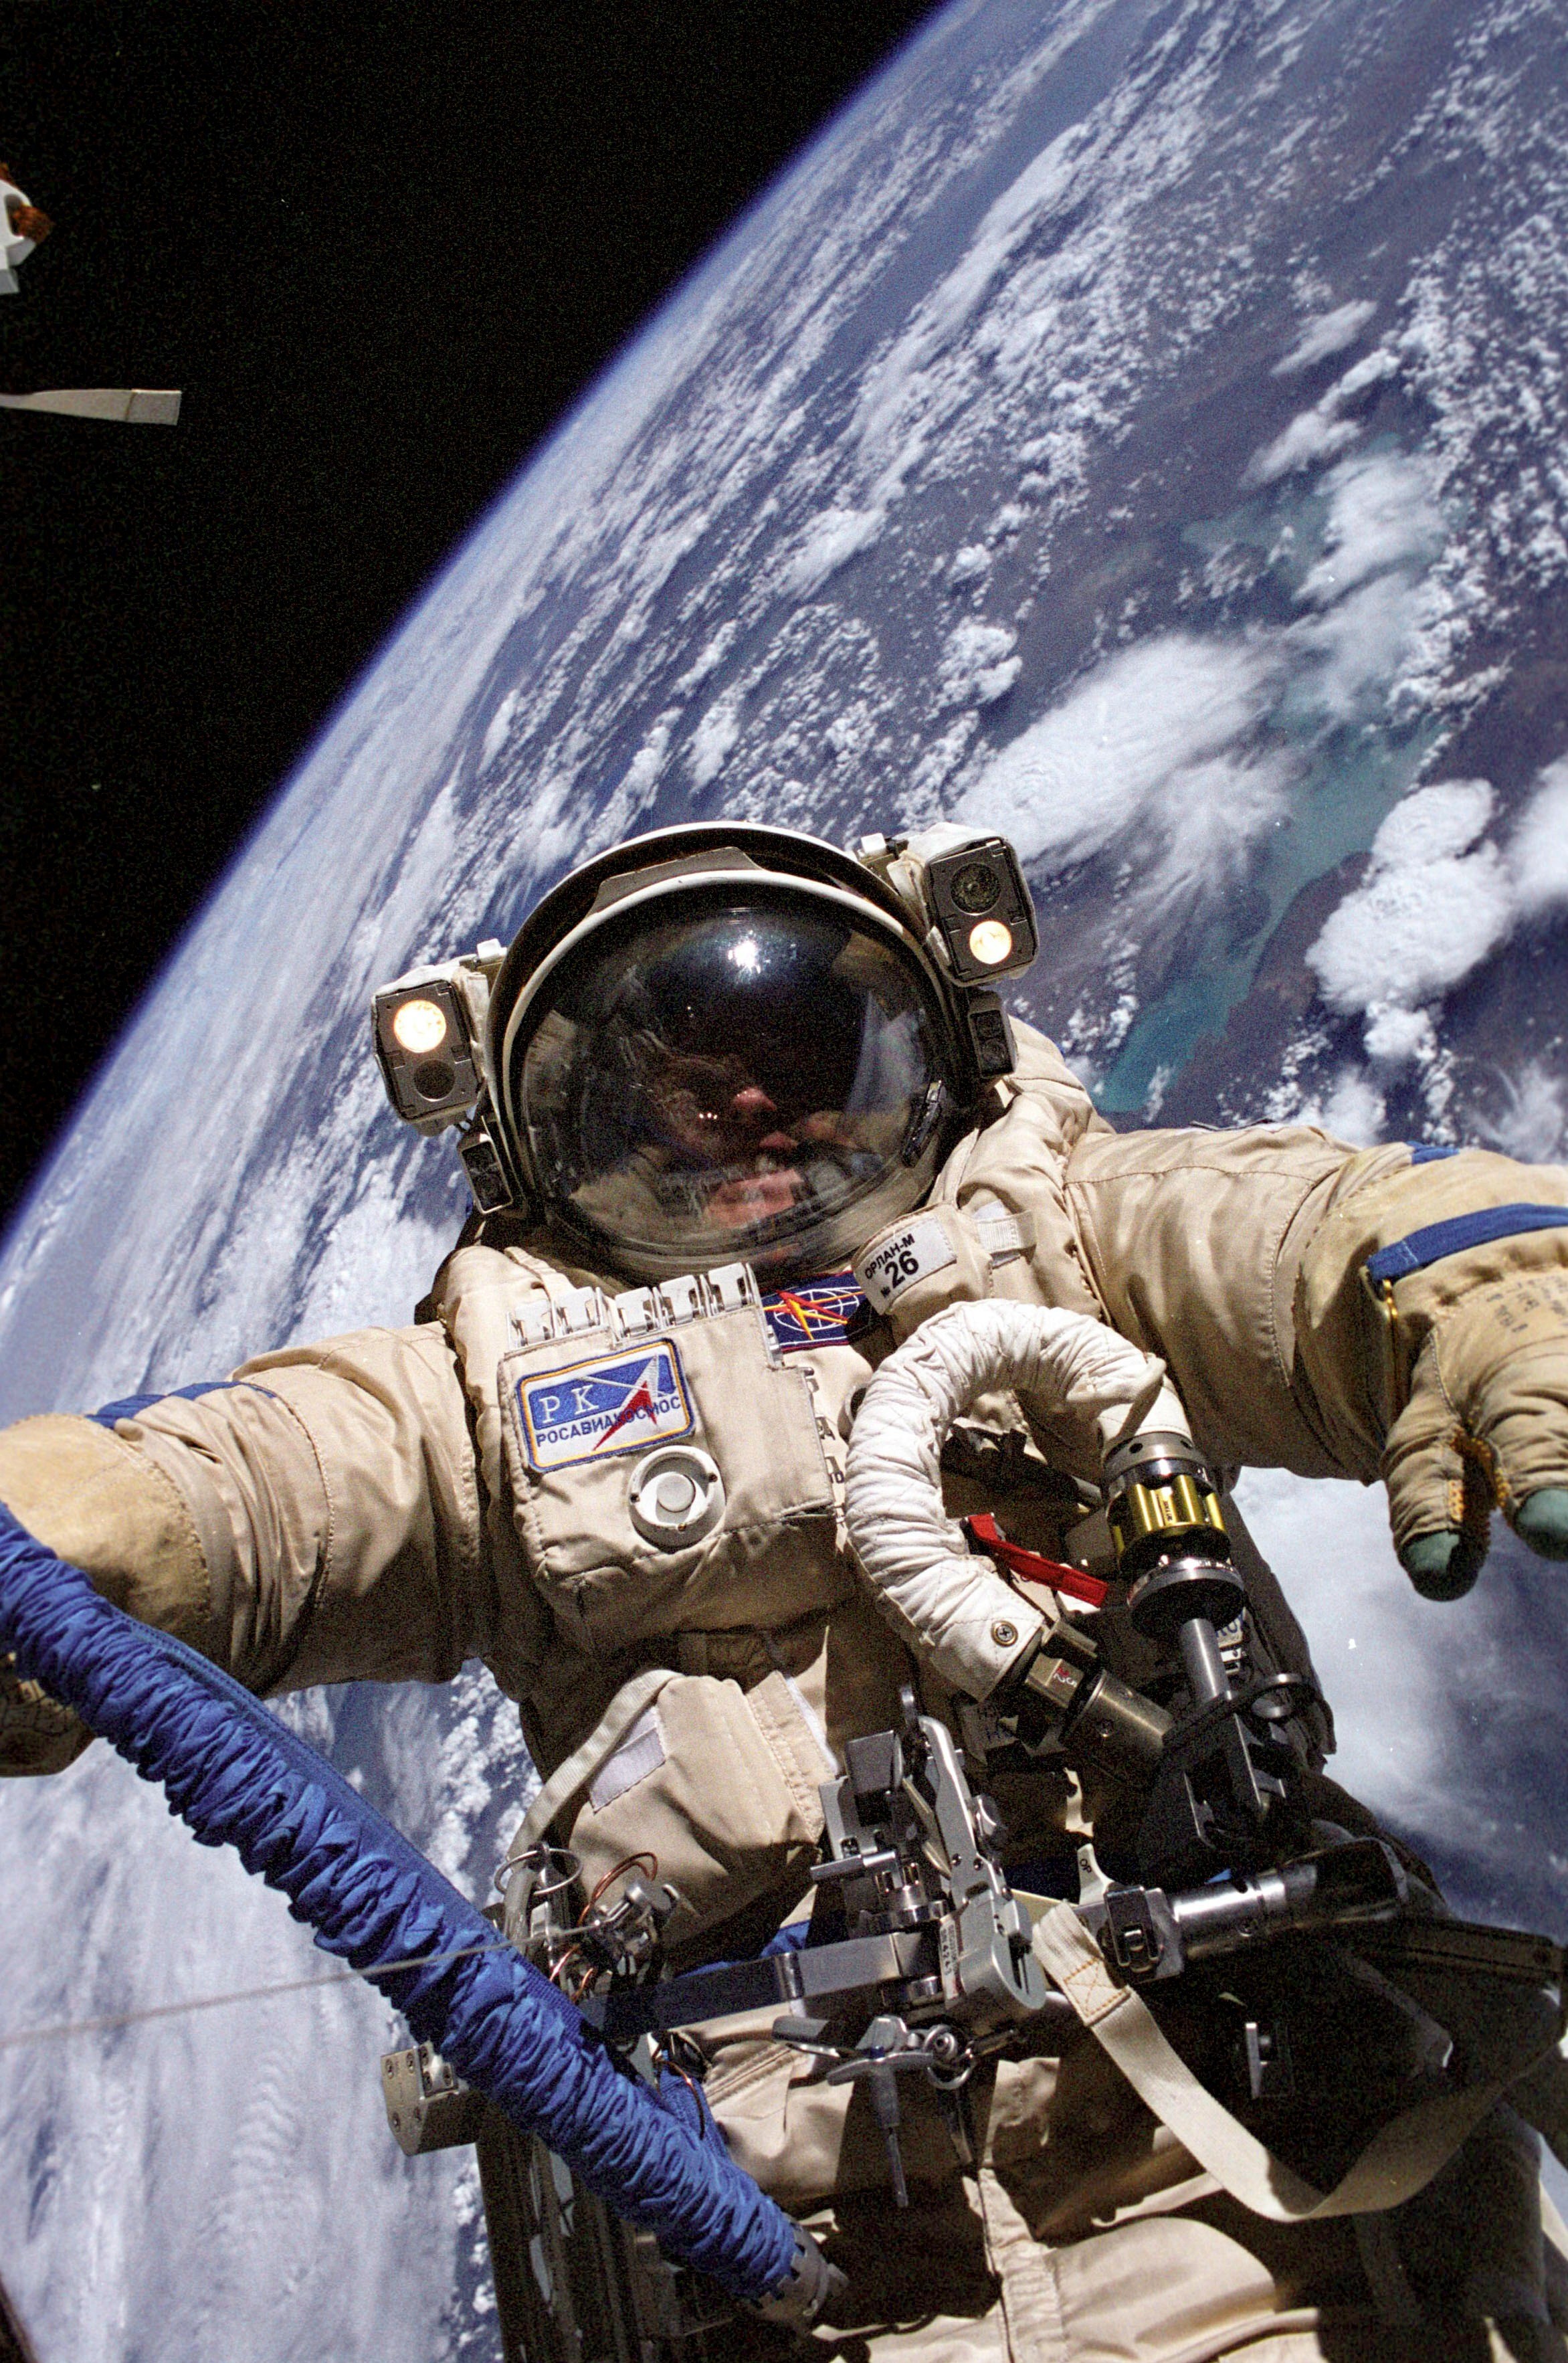 Why are NASA's space suits so clunky?